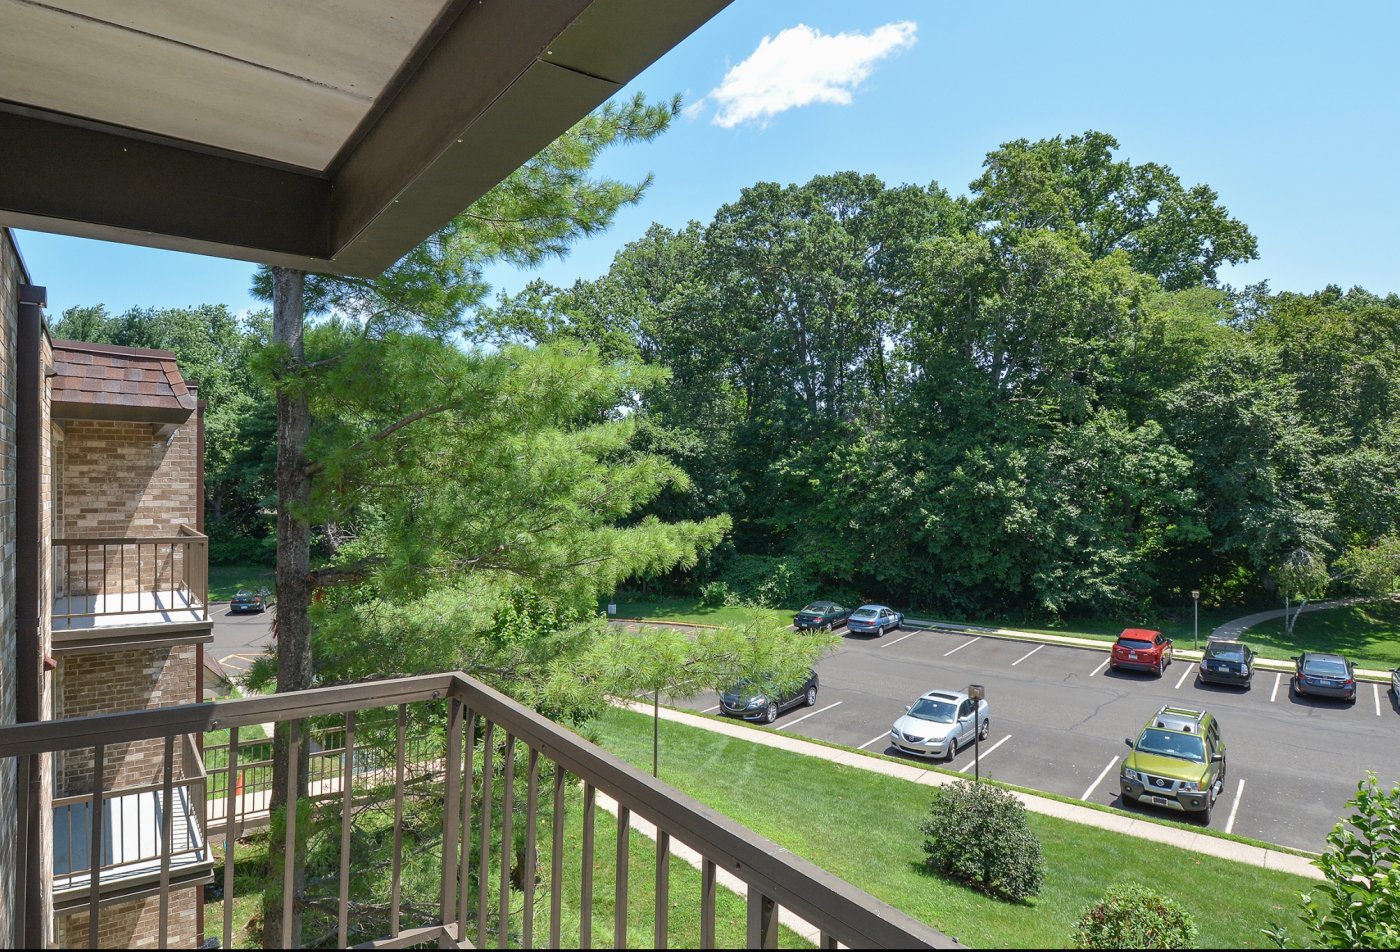 Spacious Apartment Balcony | Langhorne PA Apartments For Rent | Summit Trace Apartments